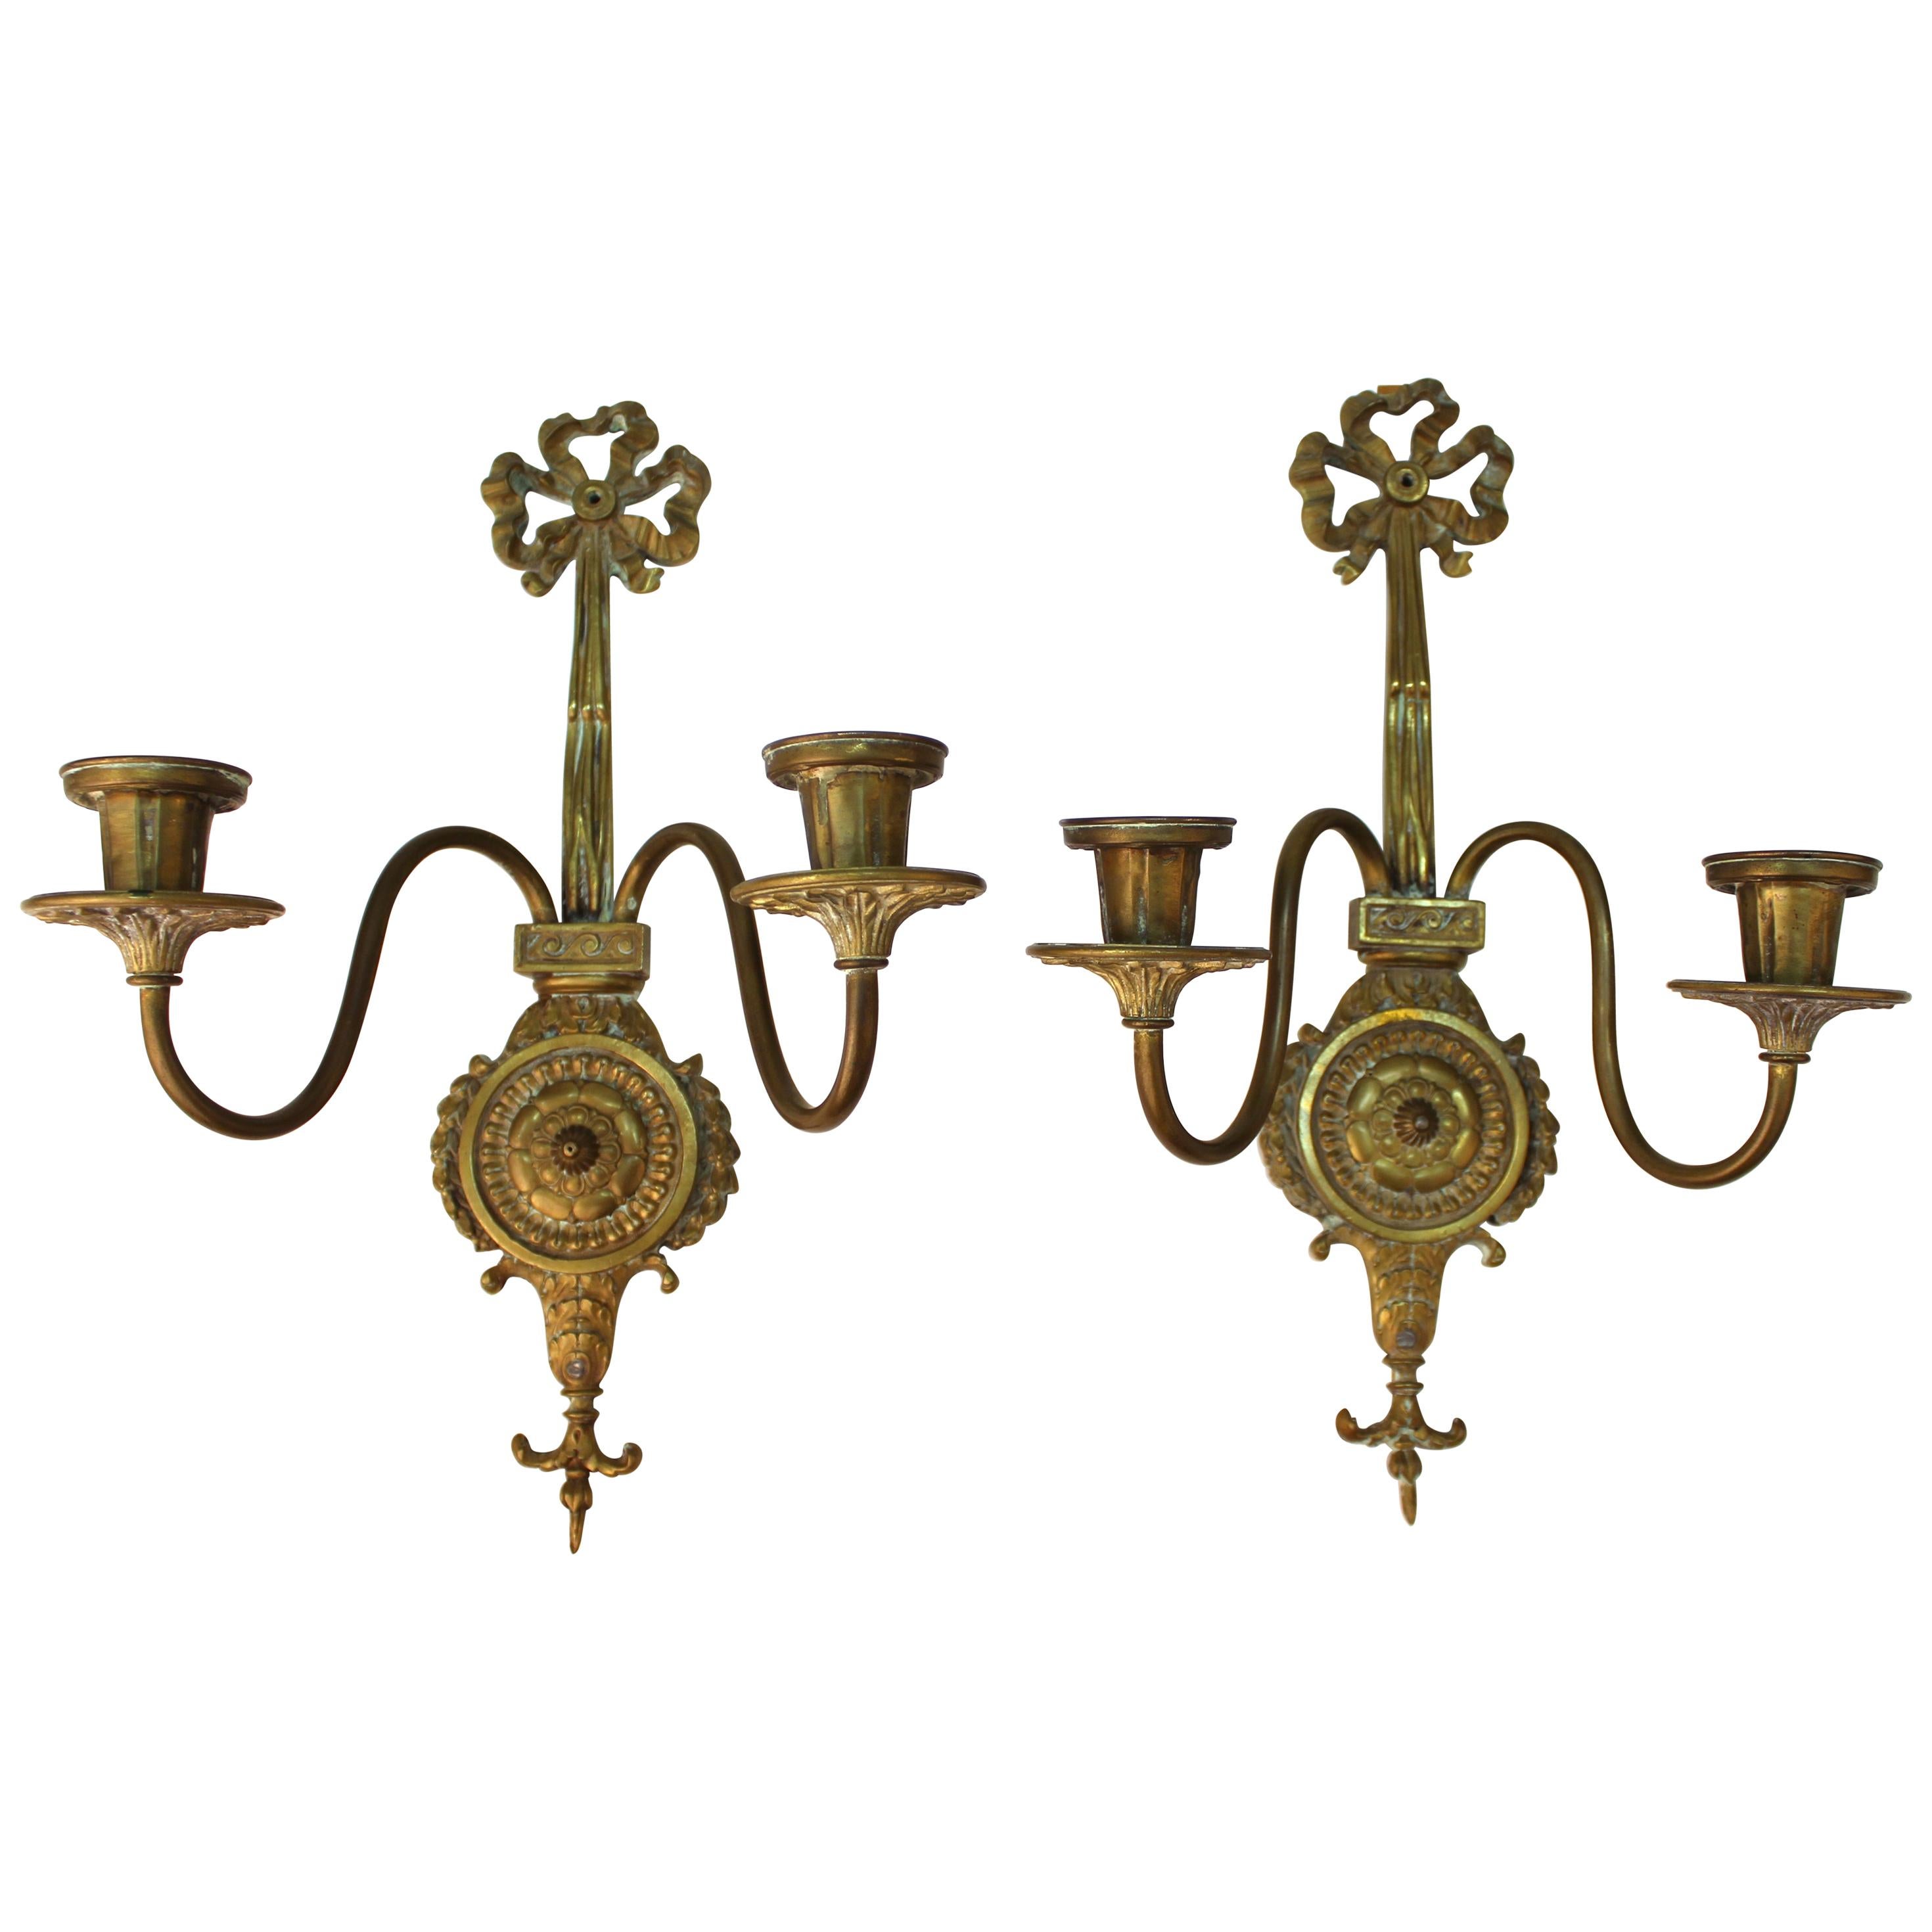 O.C. White Co. Neoclassical Style Gilt Brass Candelabra Sconces For Sale